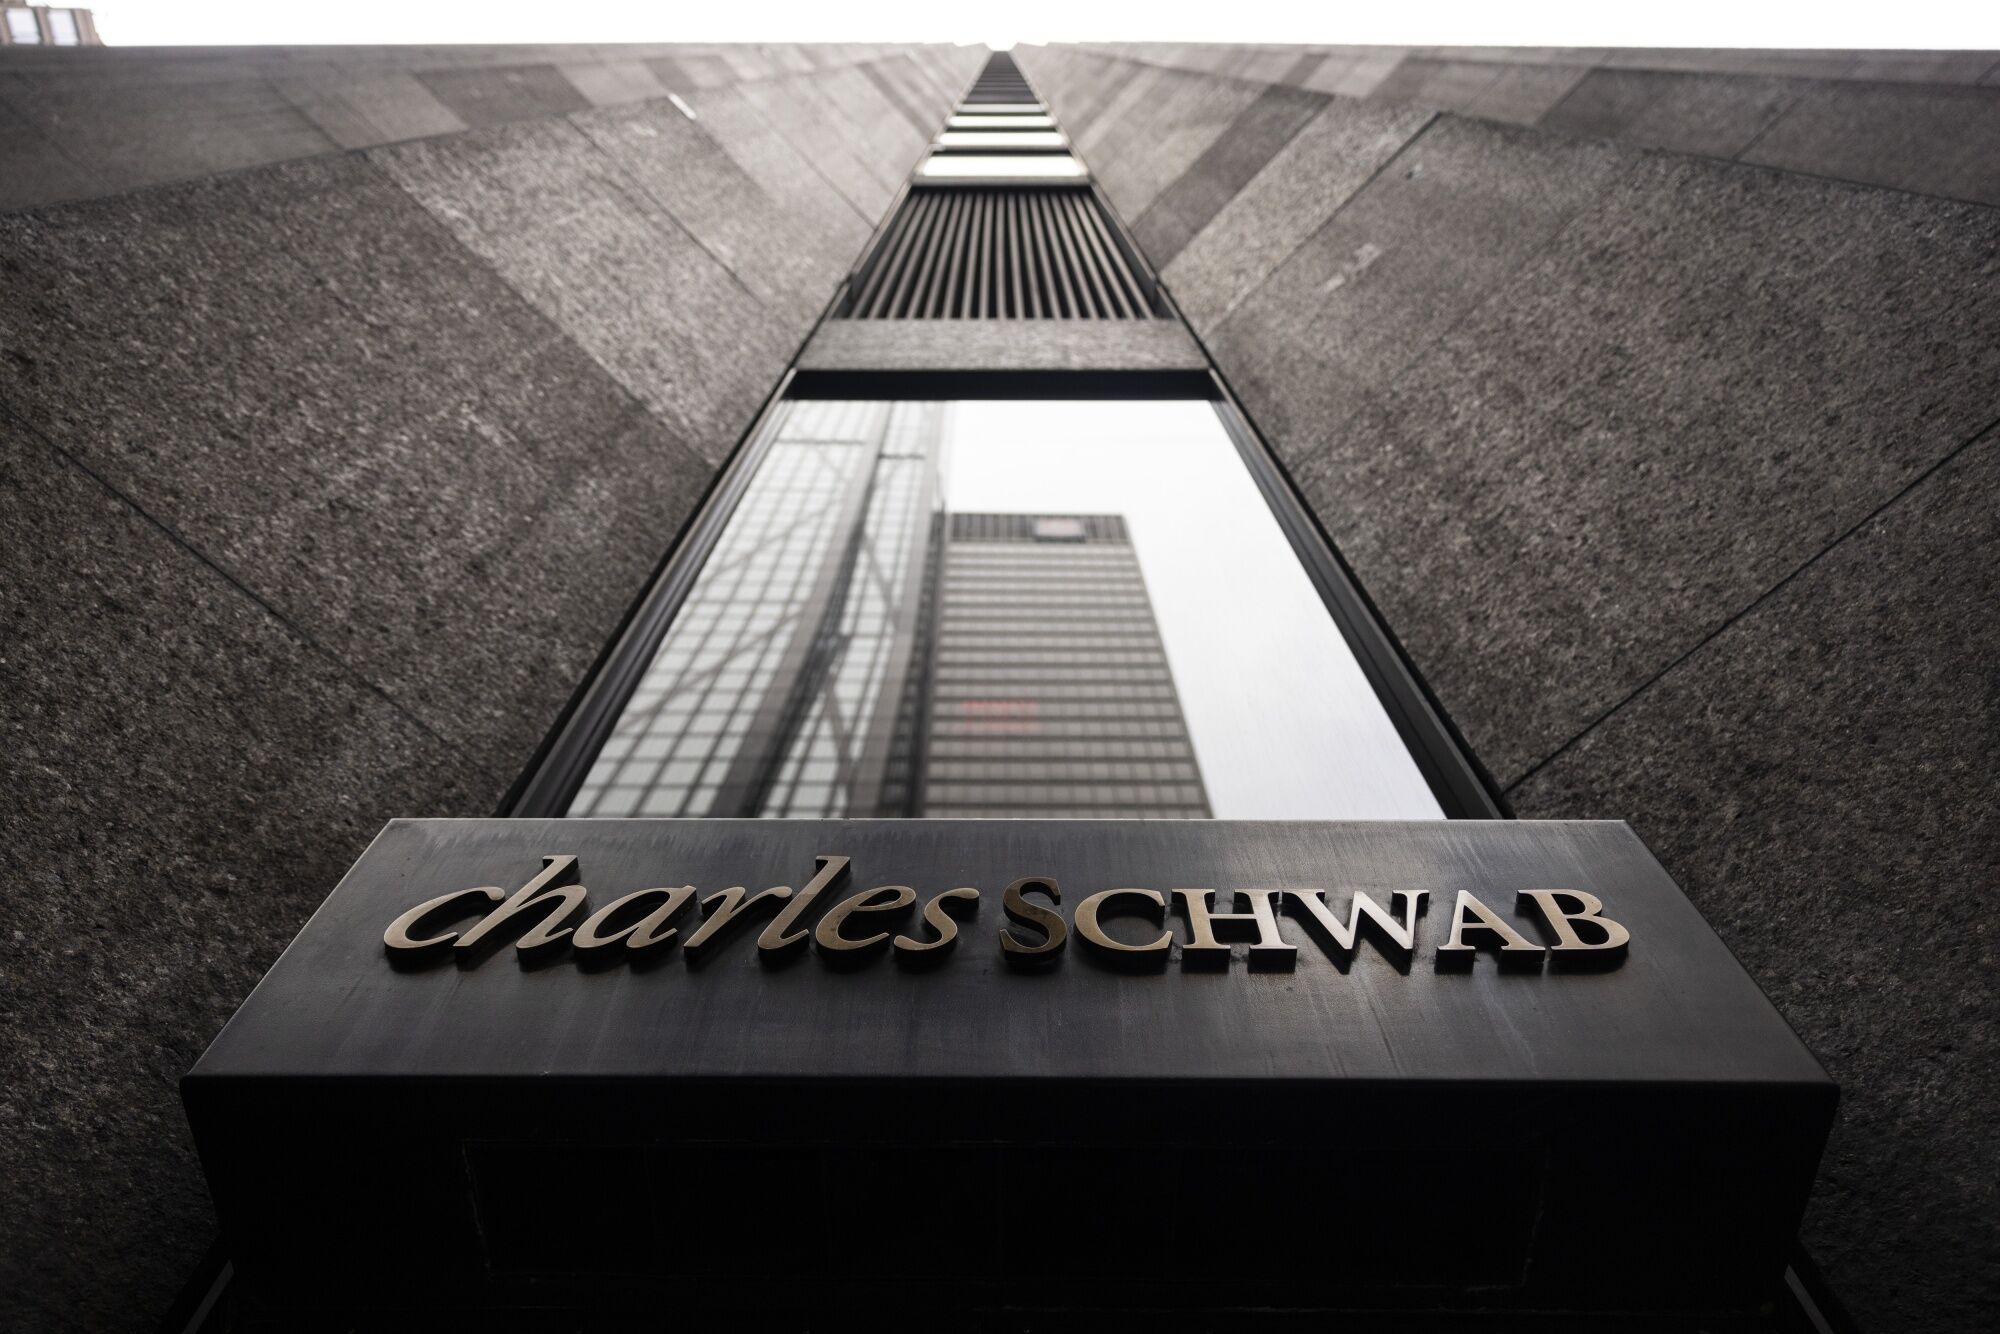 schwab charity funnels $250 million to right-wing causes